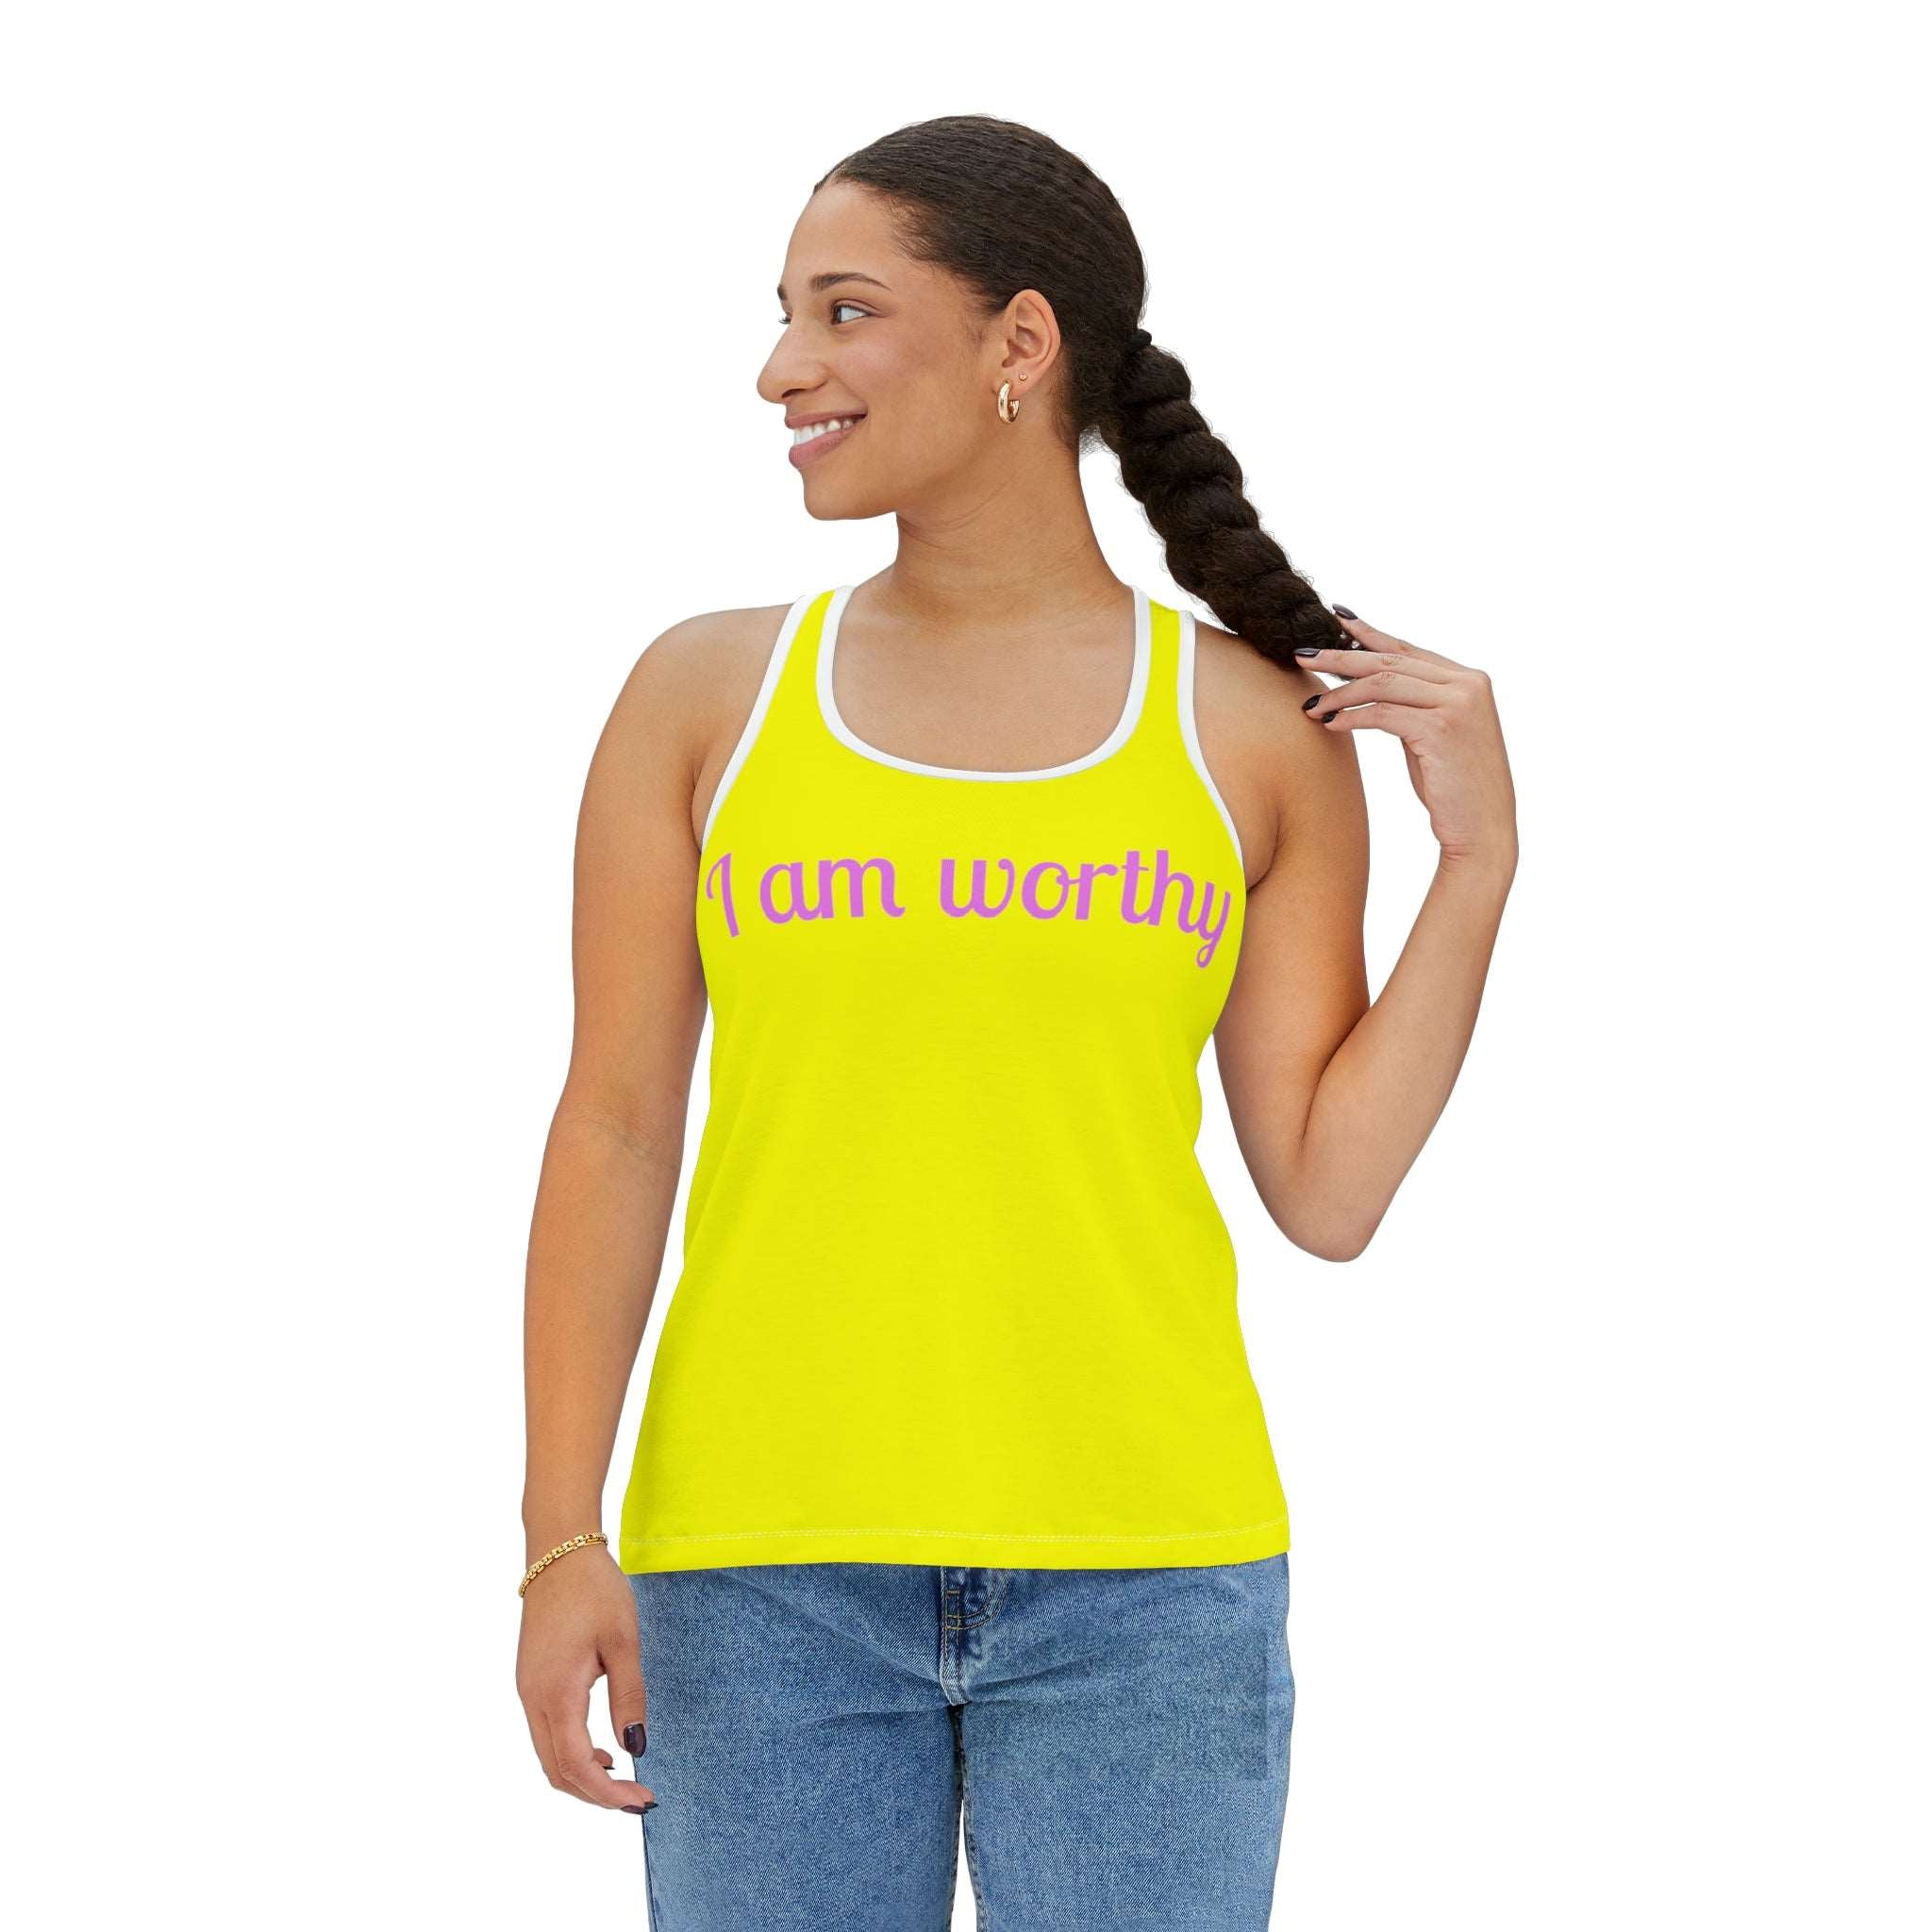 I Am Worthy Racerback: Personalized Comfort & Style White Activewear Athletic Tank Fitness Wear Racerback Racerback Tee Tank Top Women's Tank Workout Gear Yoga Tank Tank Top 1113255000698410550_2048_778c102b-d7b6-443f-97f0-3bbd308065a2 Printify